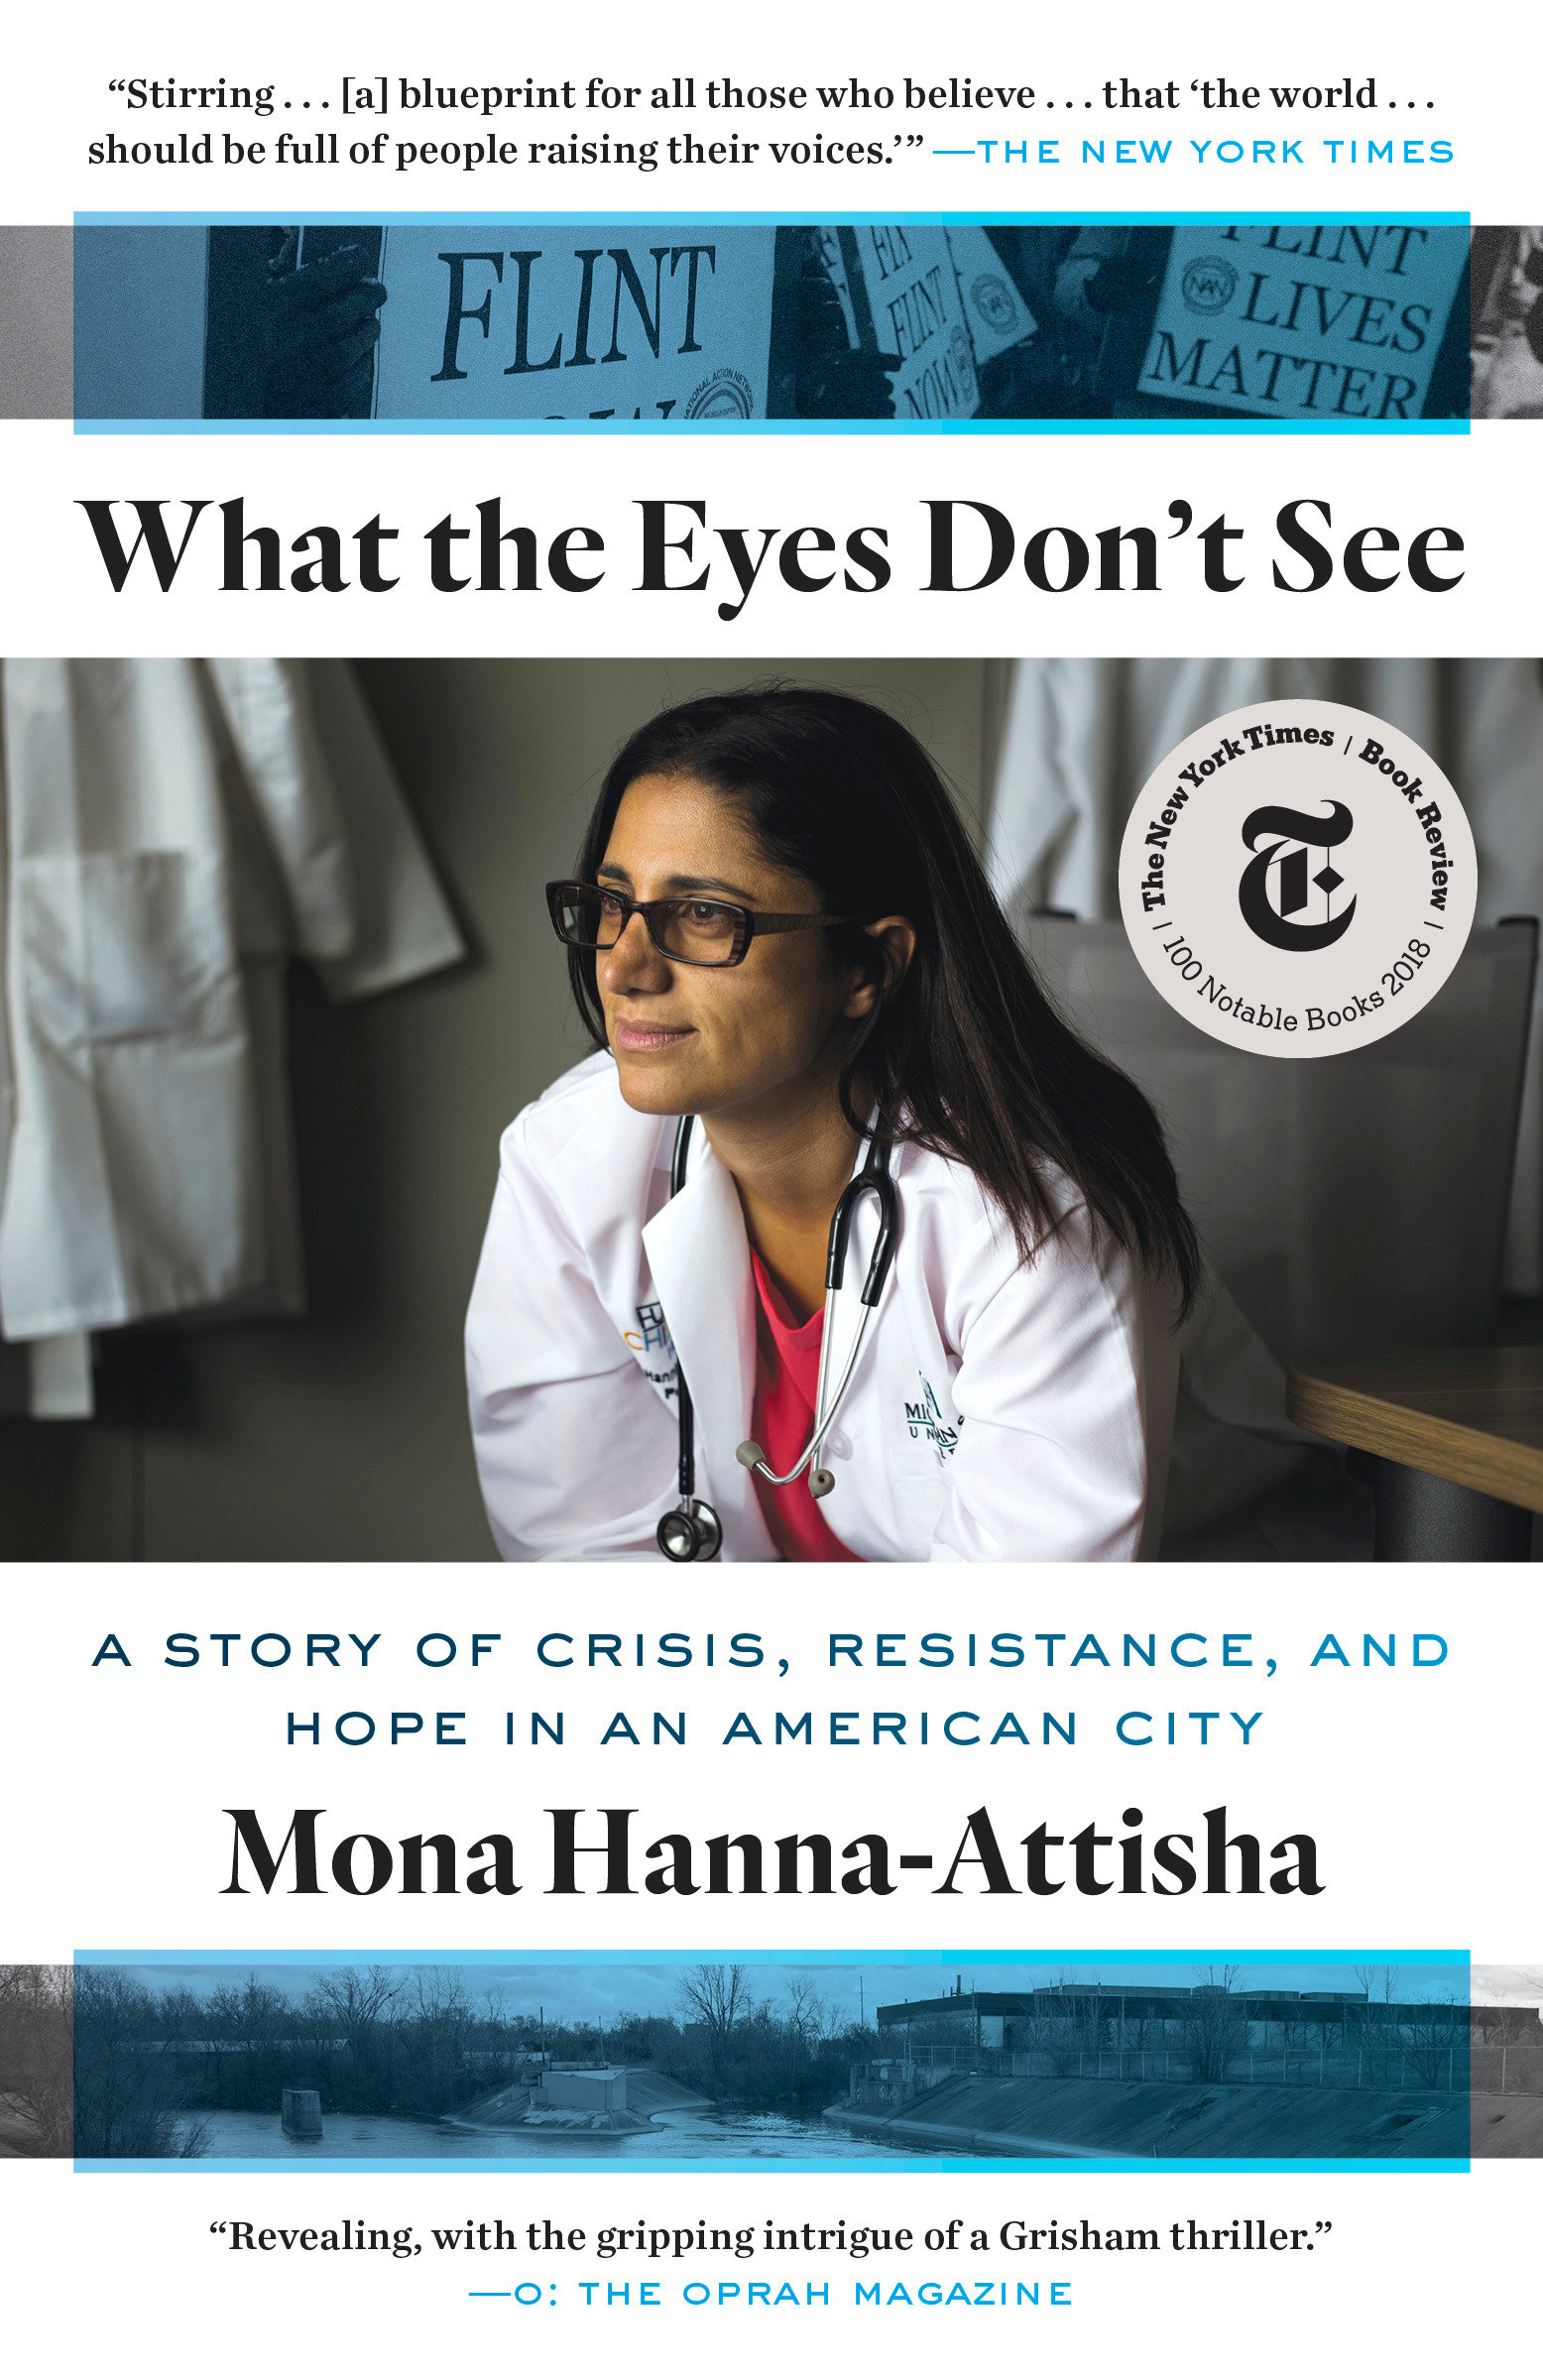 What the eyes don't see a story of crisis, resistance, and hope in an American city cover image